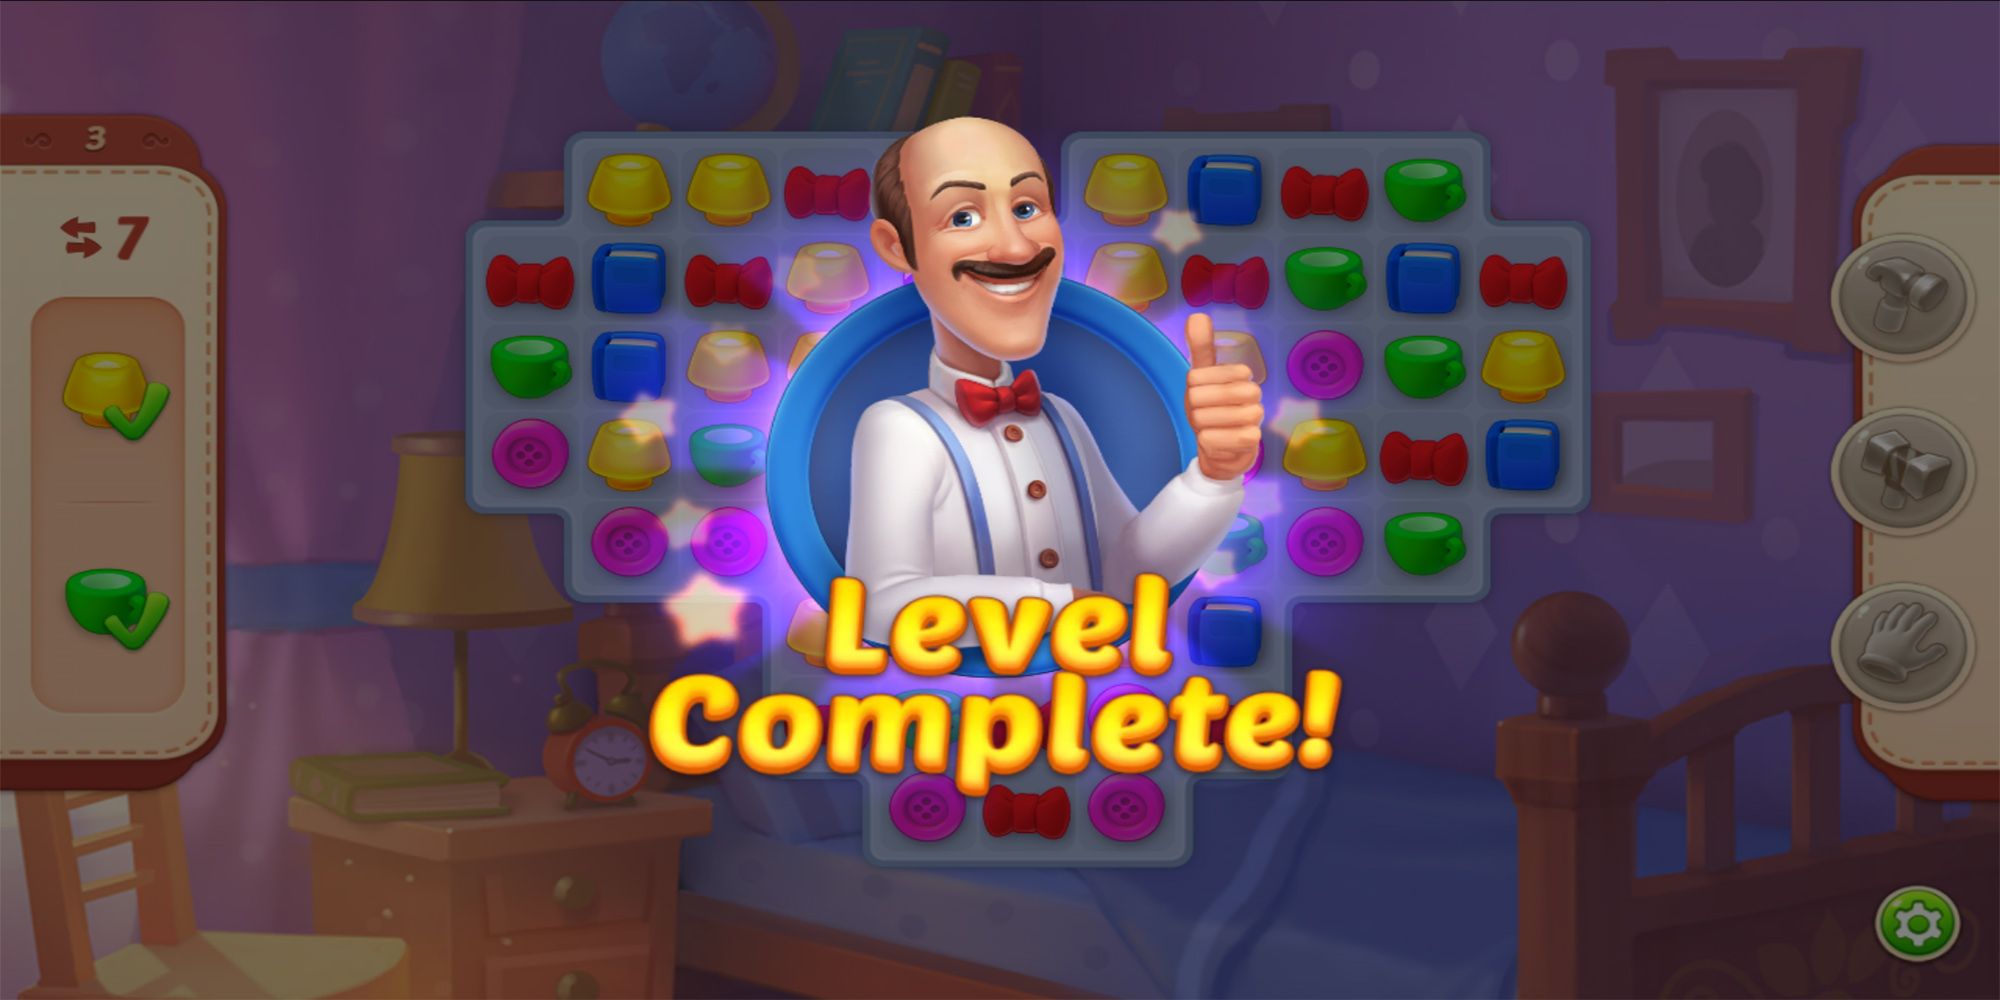 Austin, the butler, gives the player a thumbs up after completing a level in Homescapes.